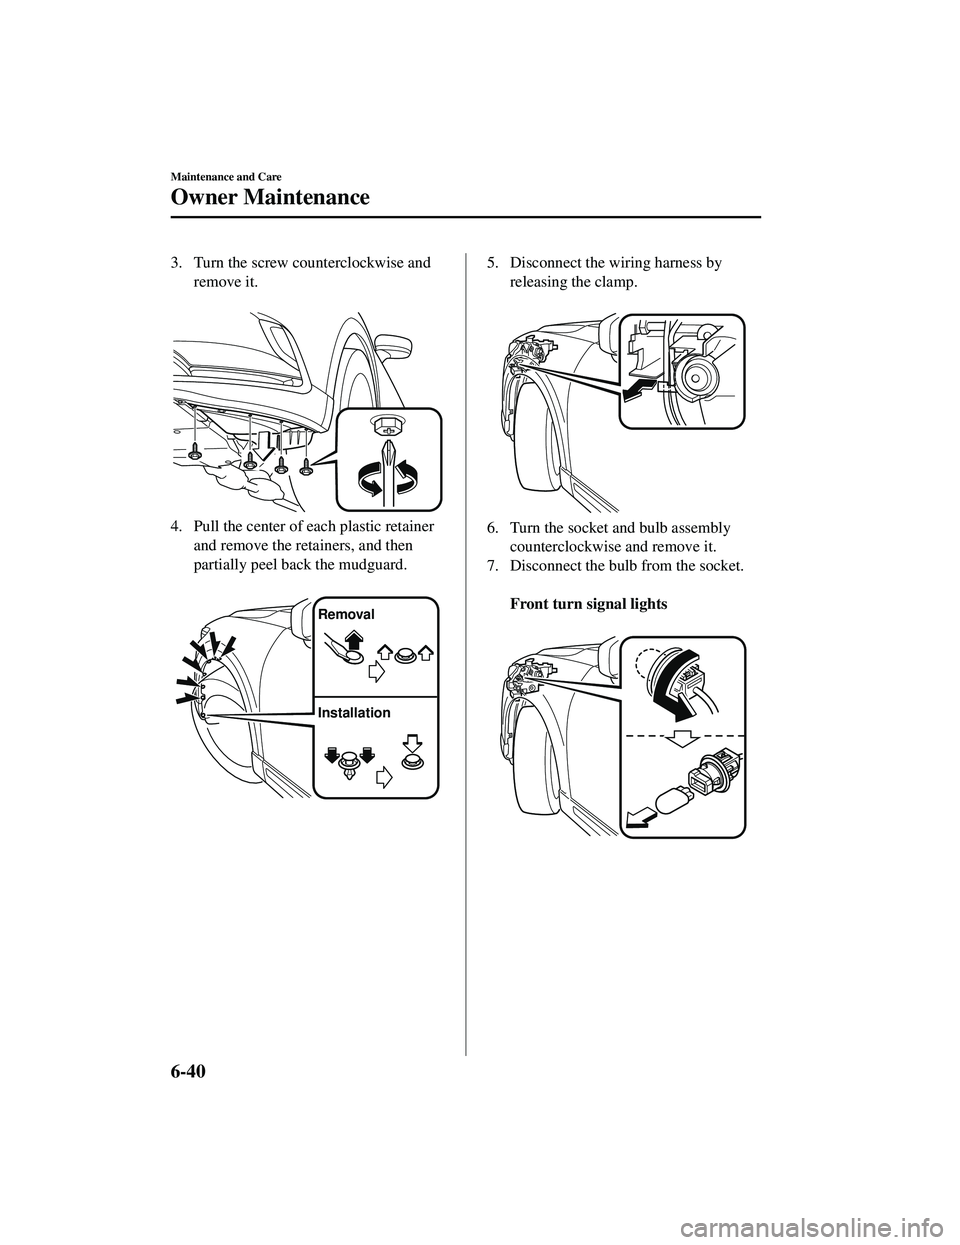 MAZDA MODEL CX-9 2021  Owners Manual 3. Turn the screw counterclockwise andremove it.
 
4. Pull the center of each plastic retainerand remove the retainers, and then
partially peel back the mudguard.
 
Removal
Installation
5. Disconnect 